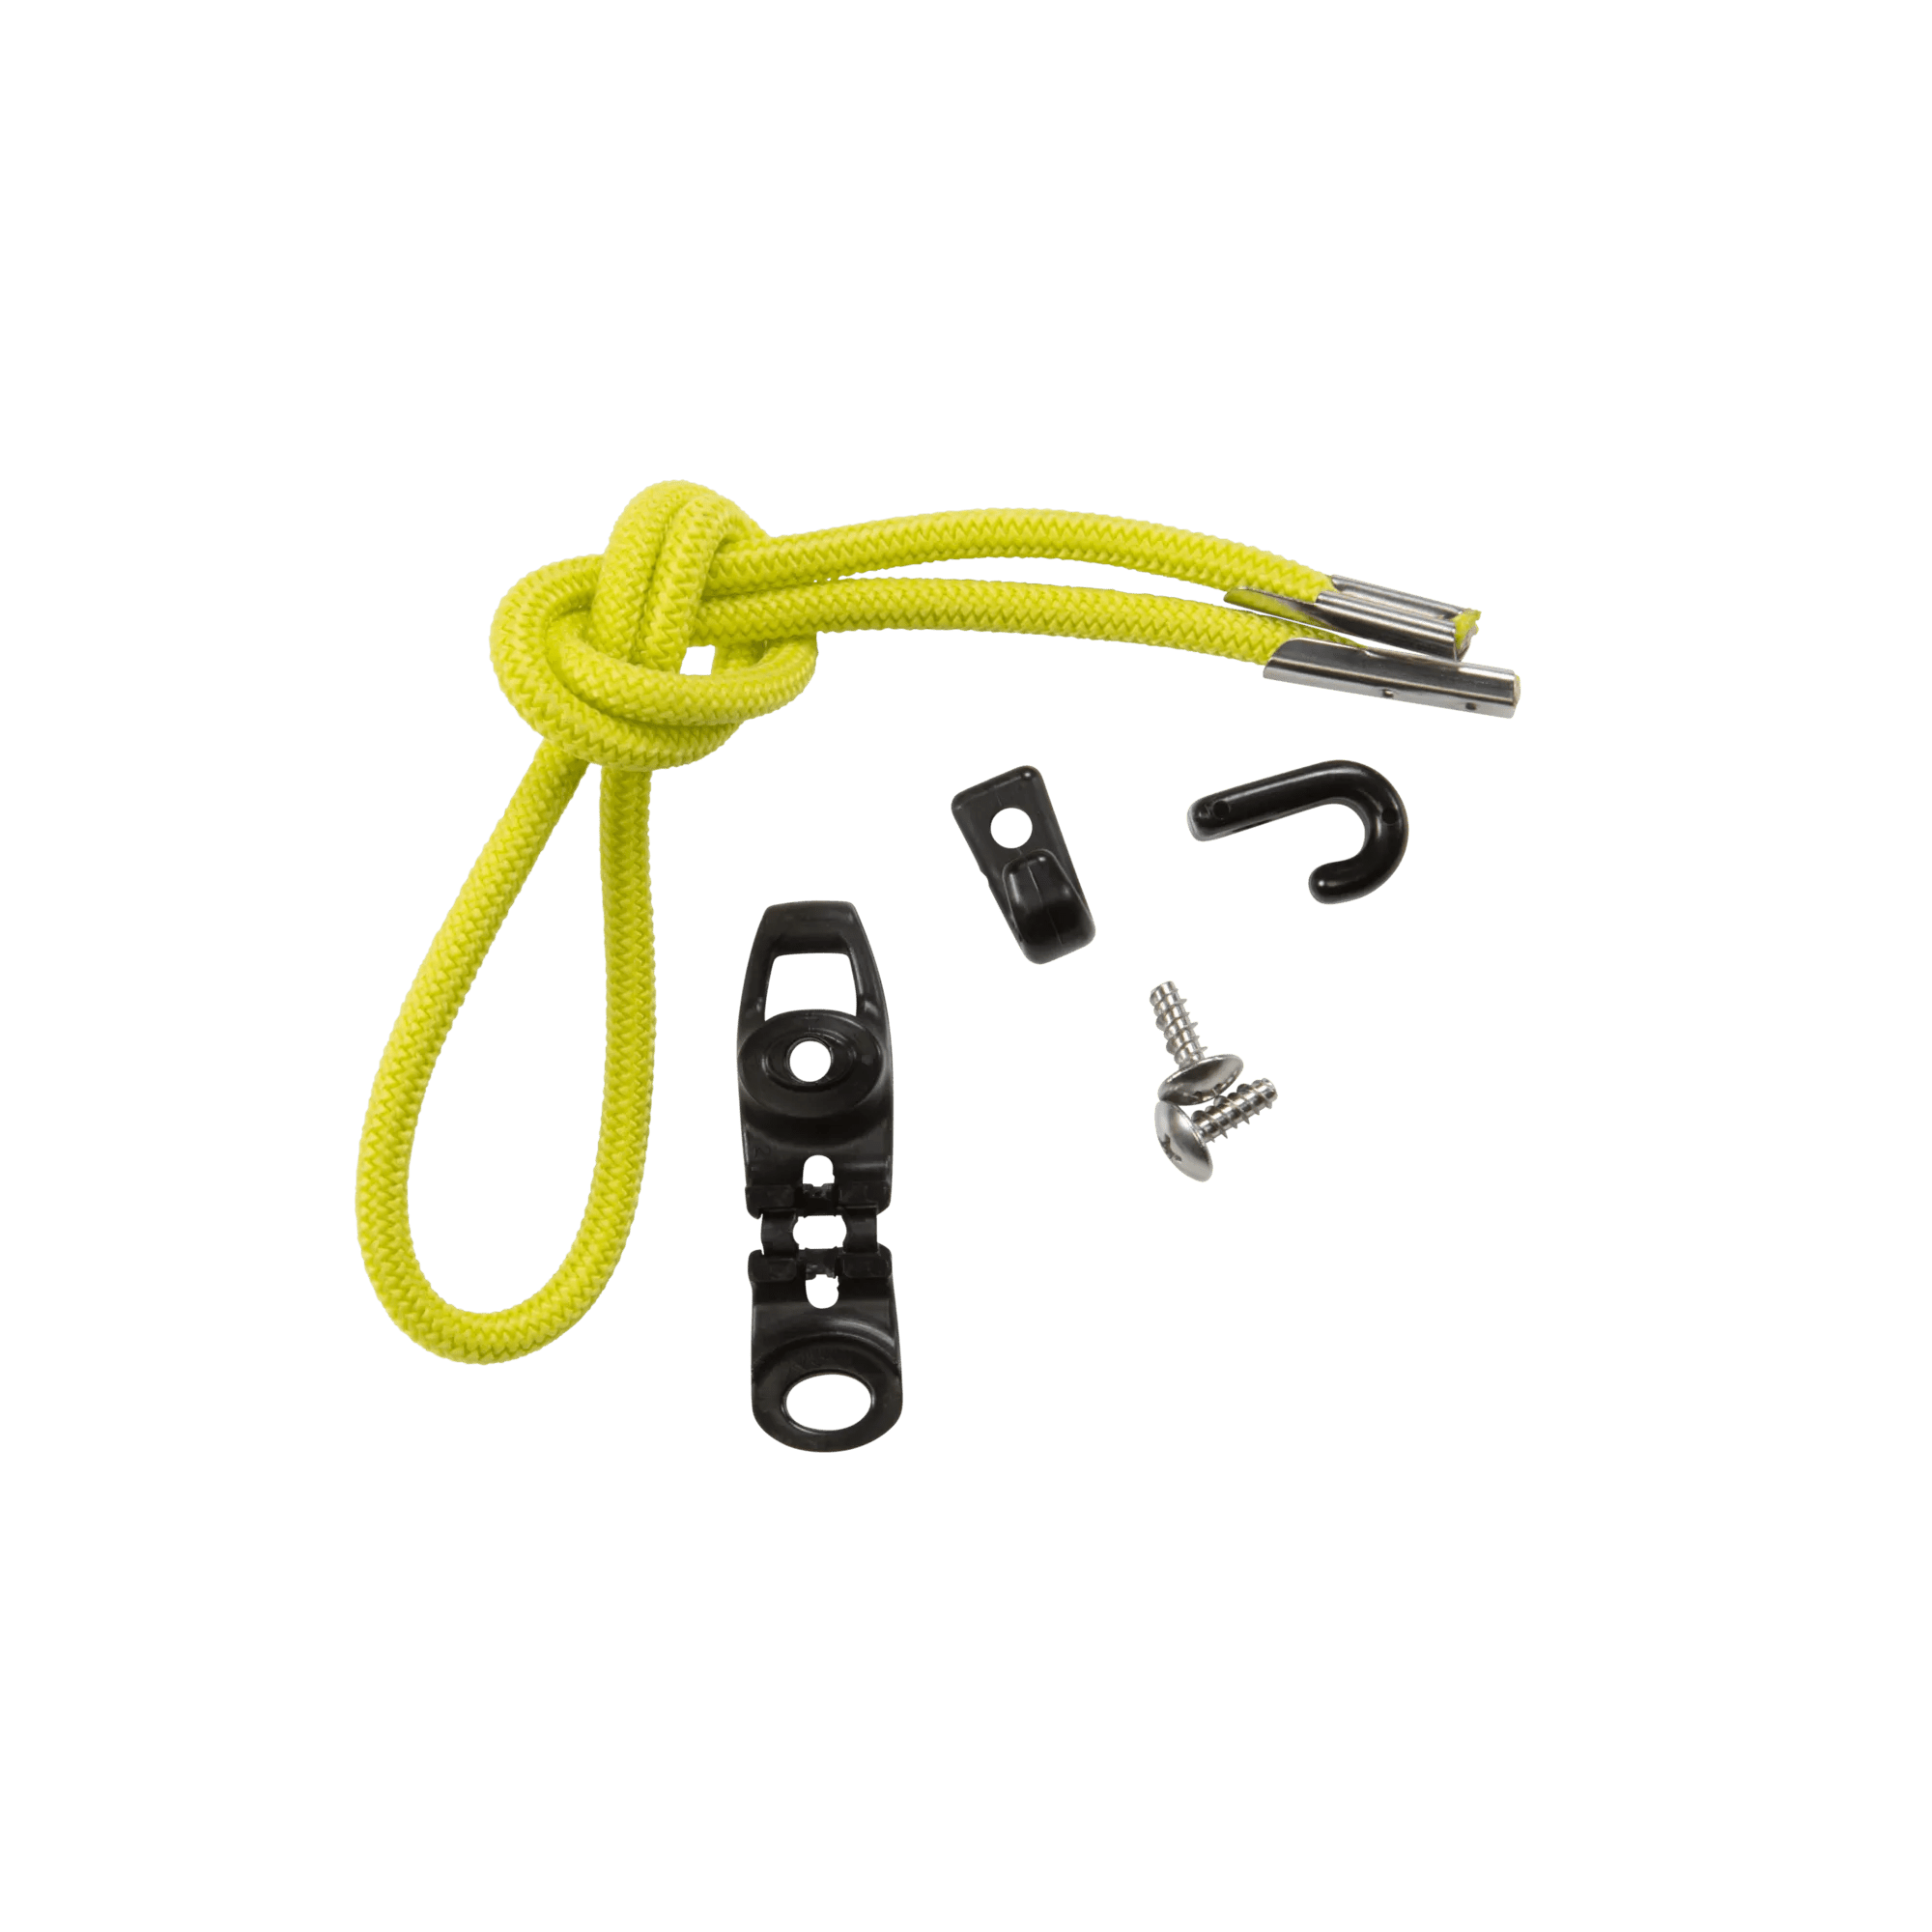 PELICAN - Yellow Green 25" (63.5 cm) Multi-Purpose Bungee Cord with Hook -  - PS1545 - ISO